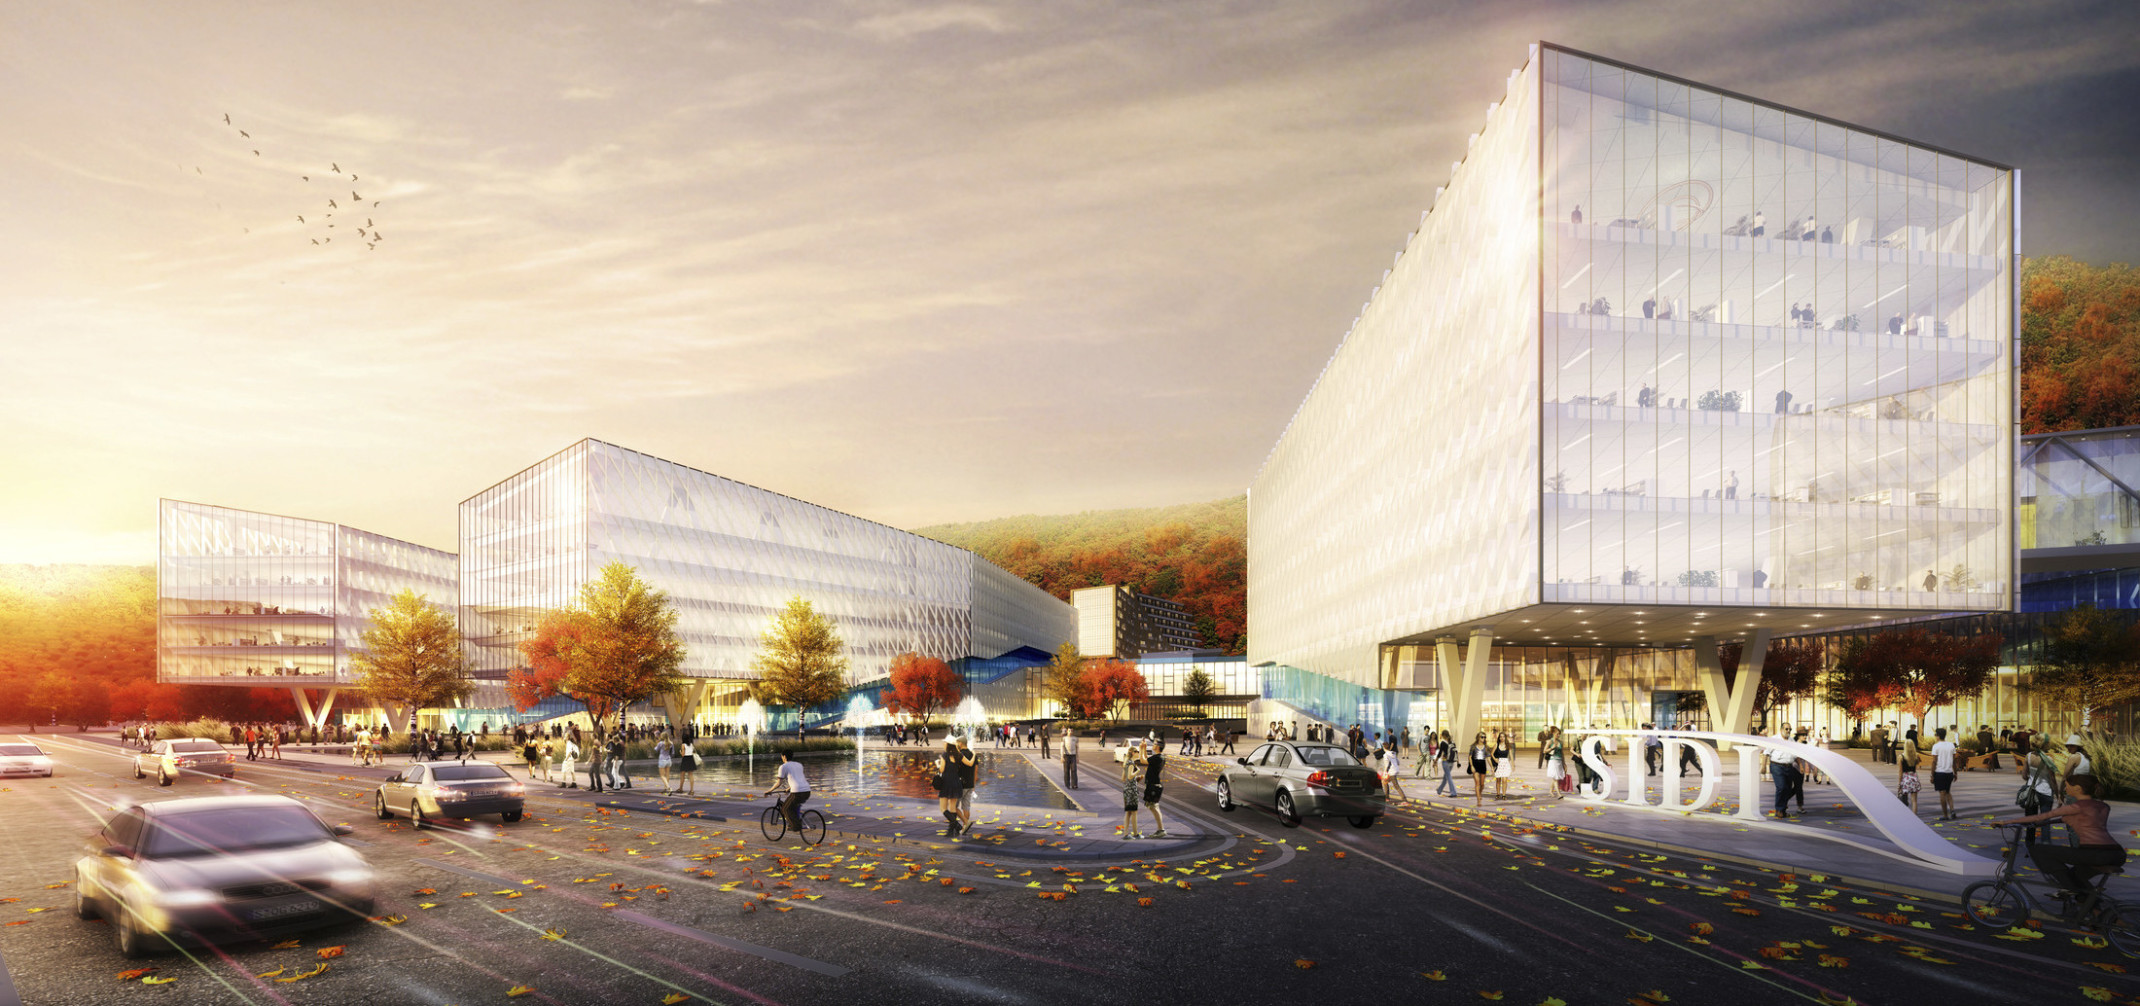 Rendering of exterior view of 3 buildings for the Shenzhen Institute of Design and Innovation